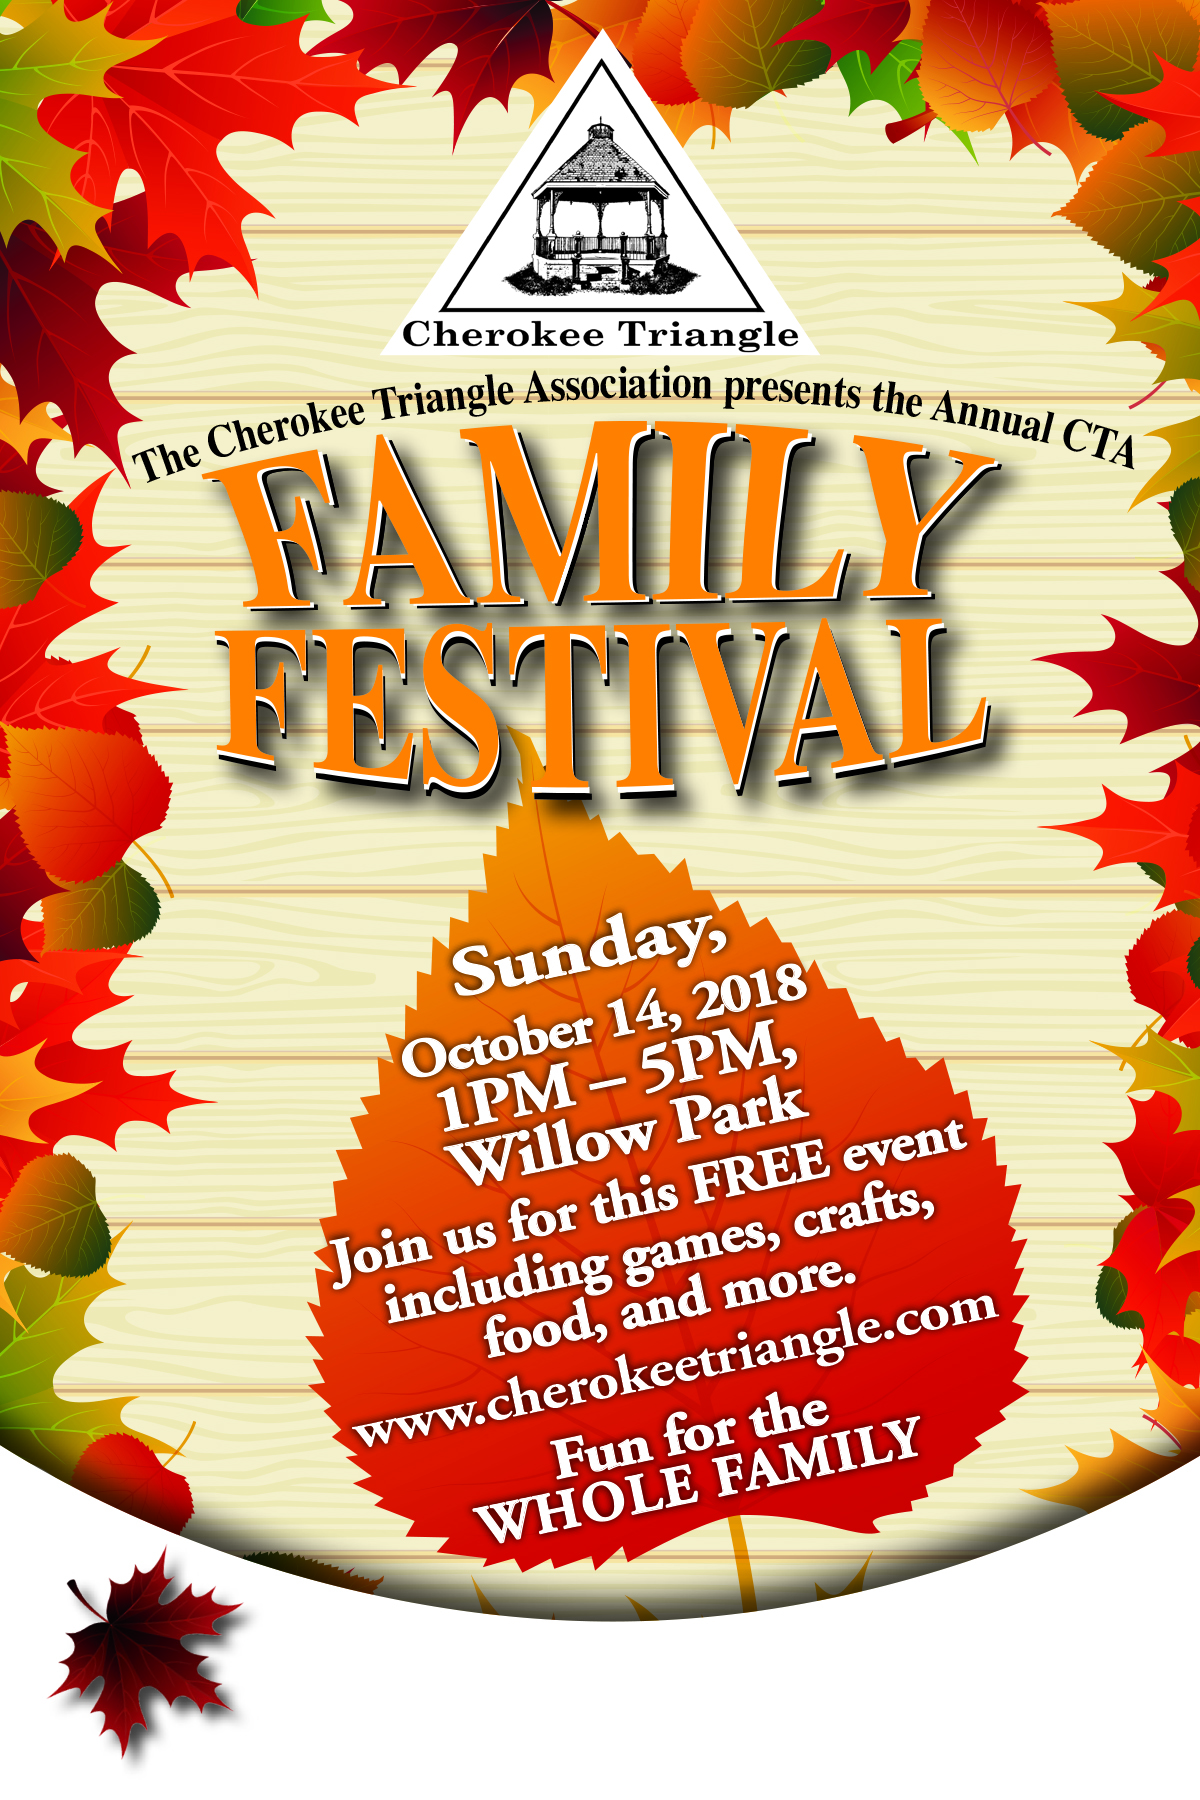 Don’t this coming Sunday afternoon’s Cherokee Triangle Family